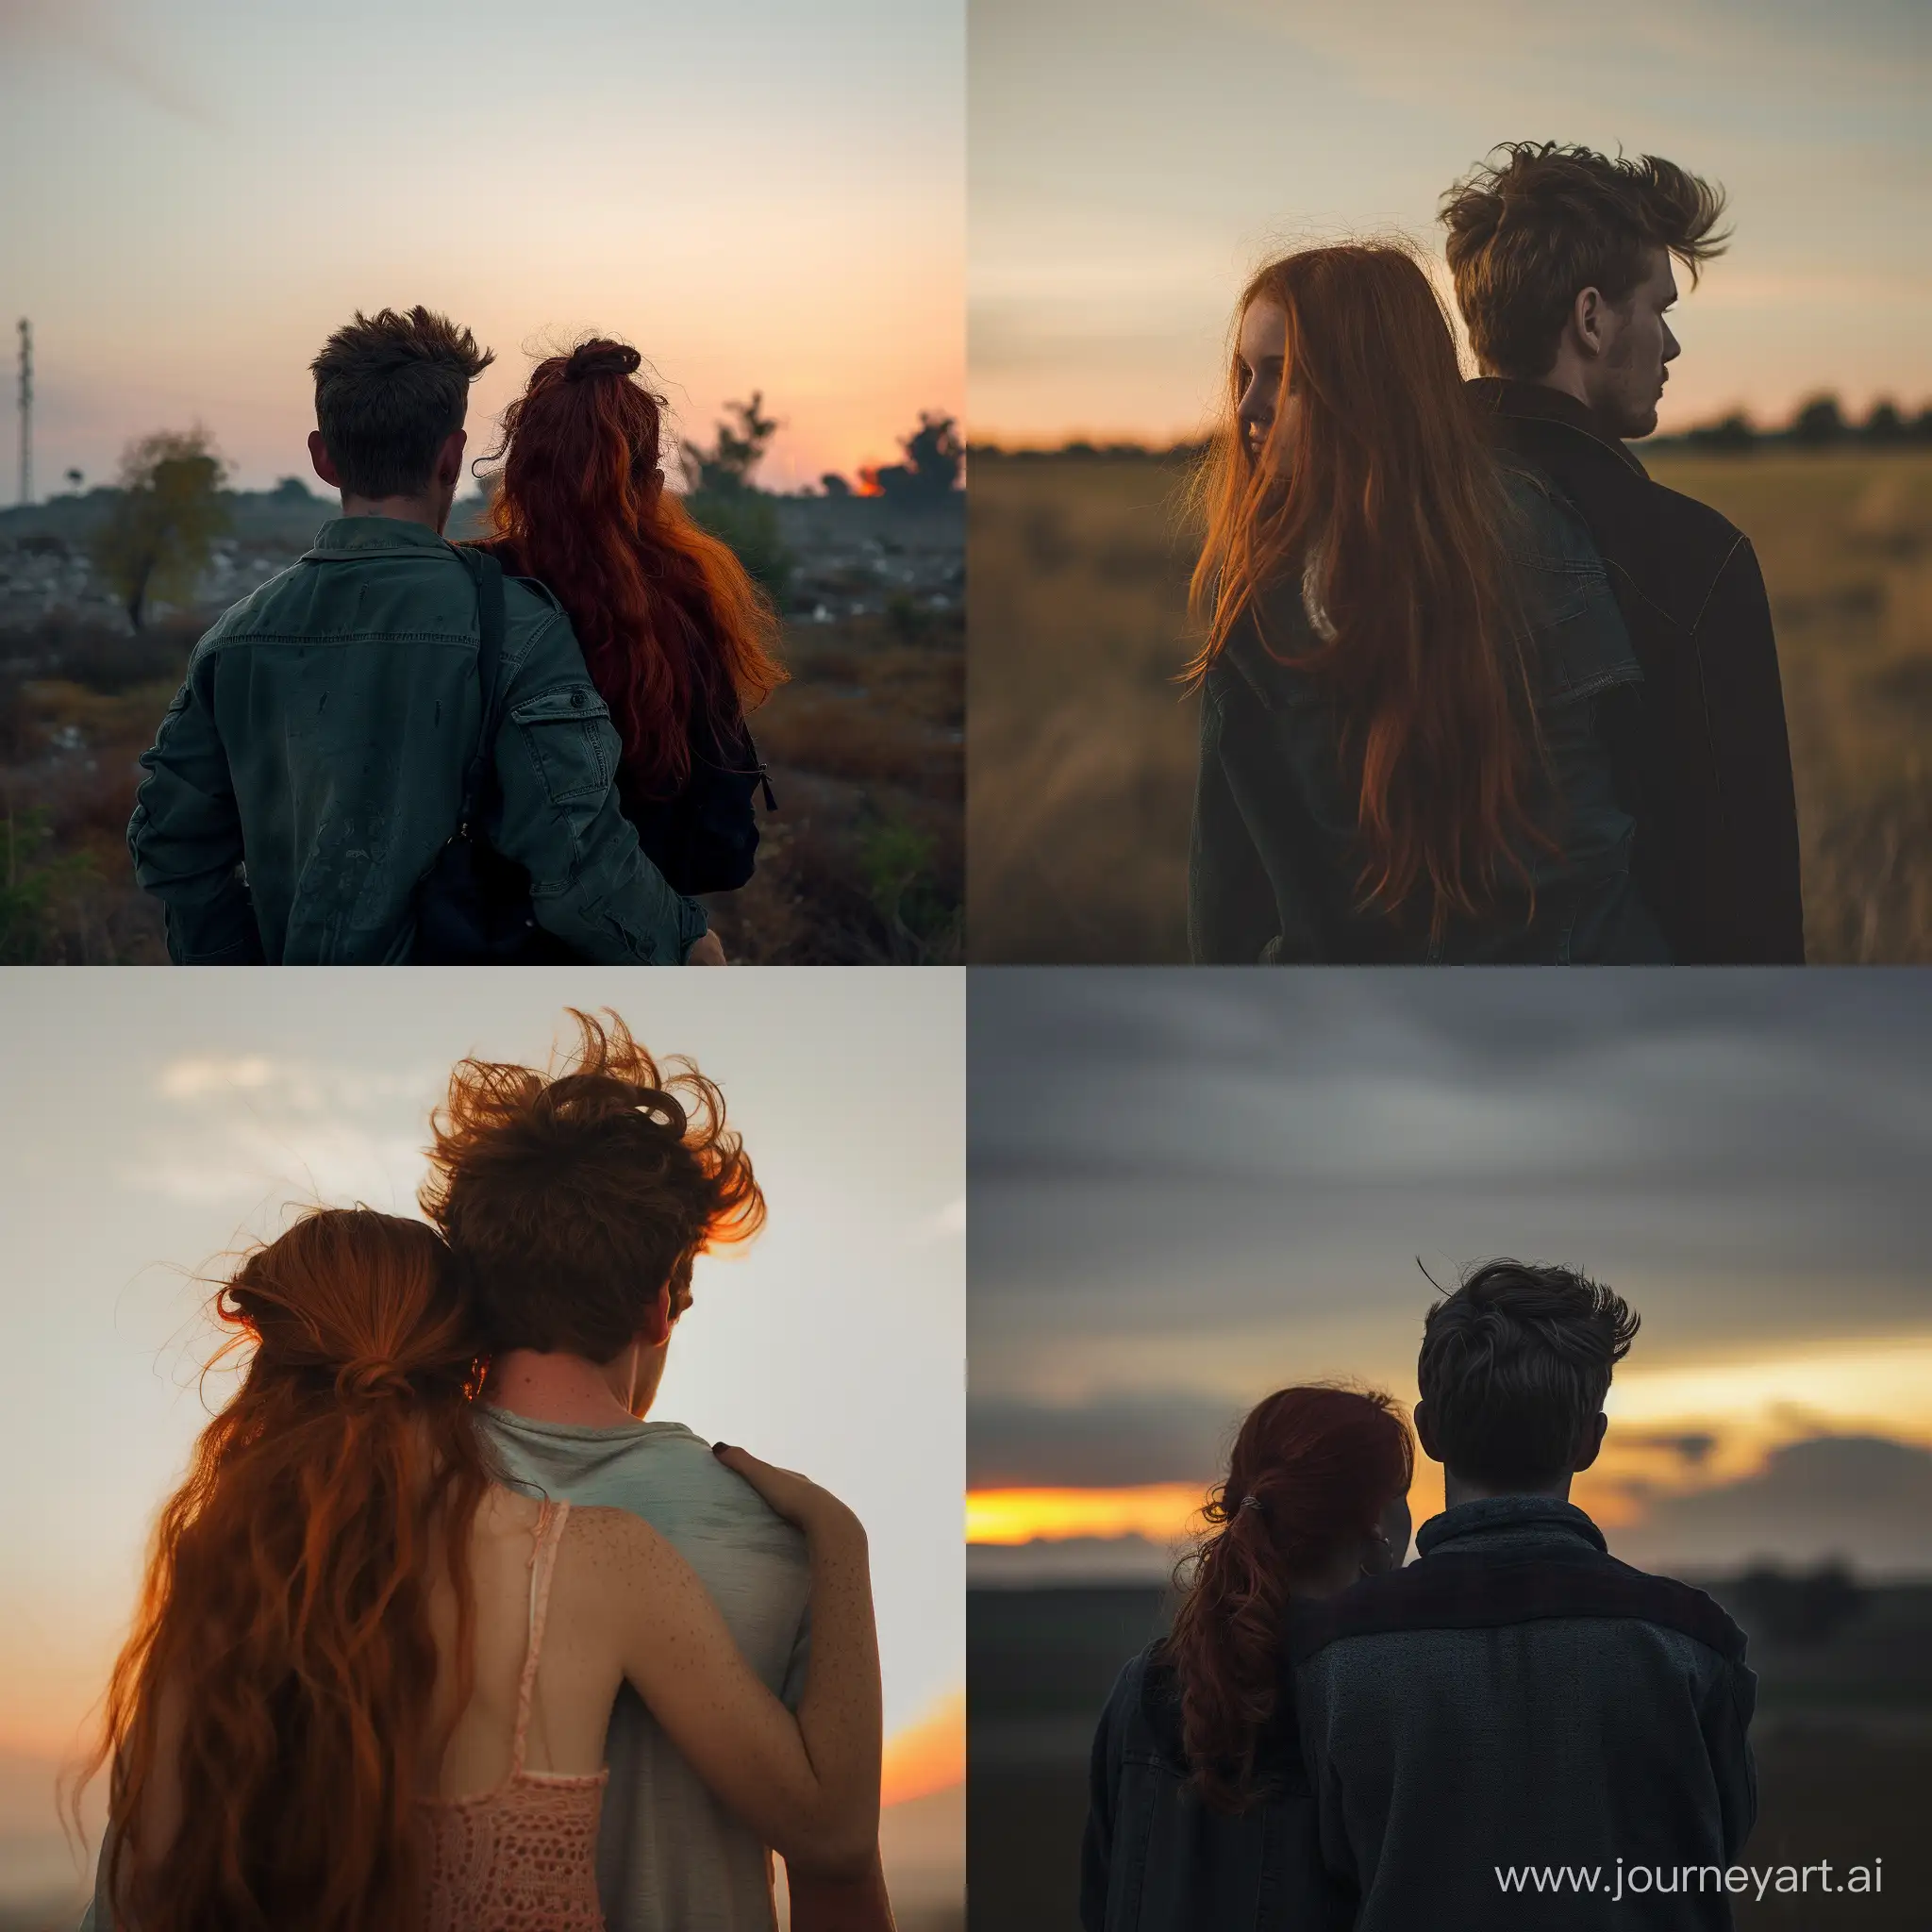 photo from backfront, redhair girl on back of man, they stood before sun goes down 